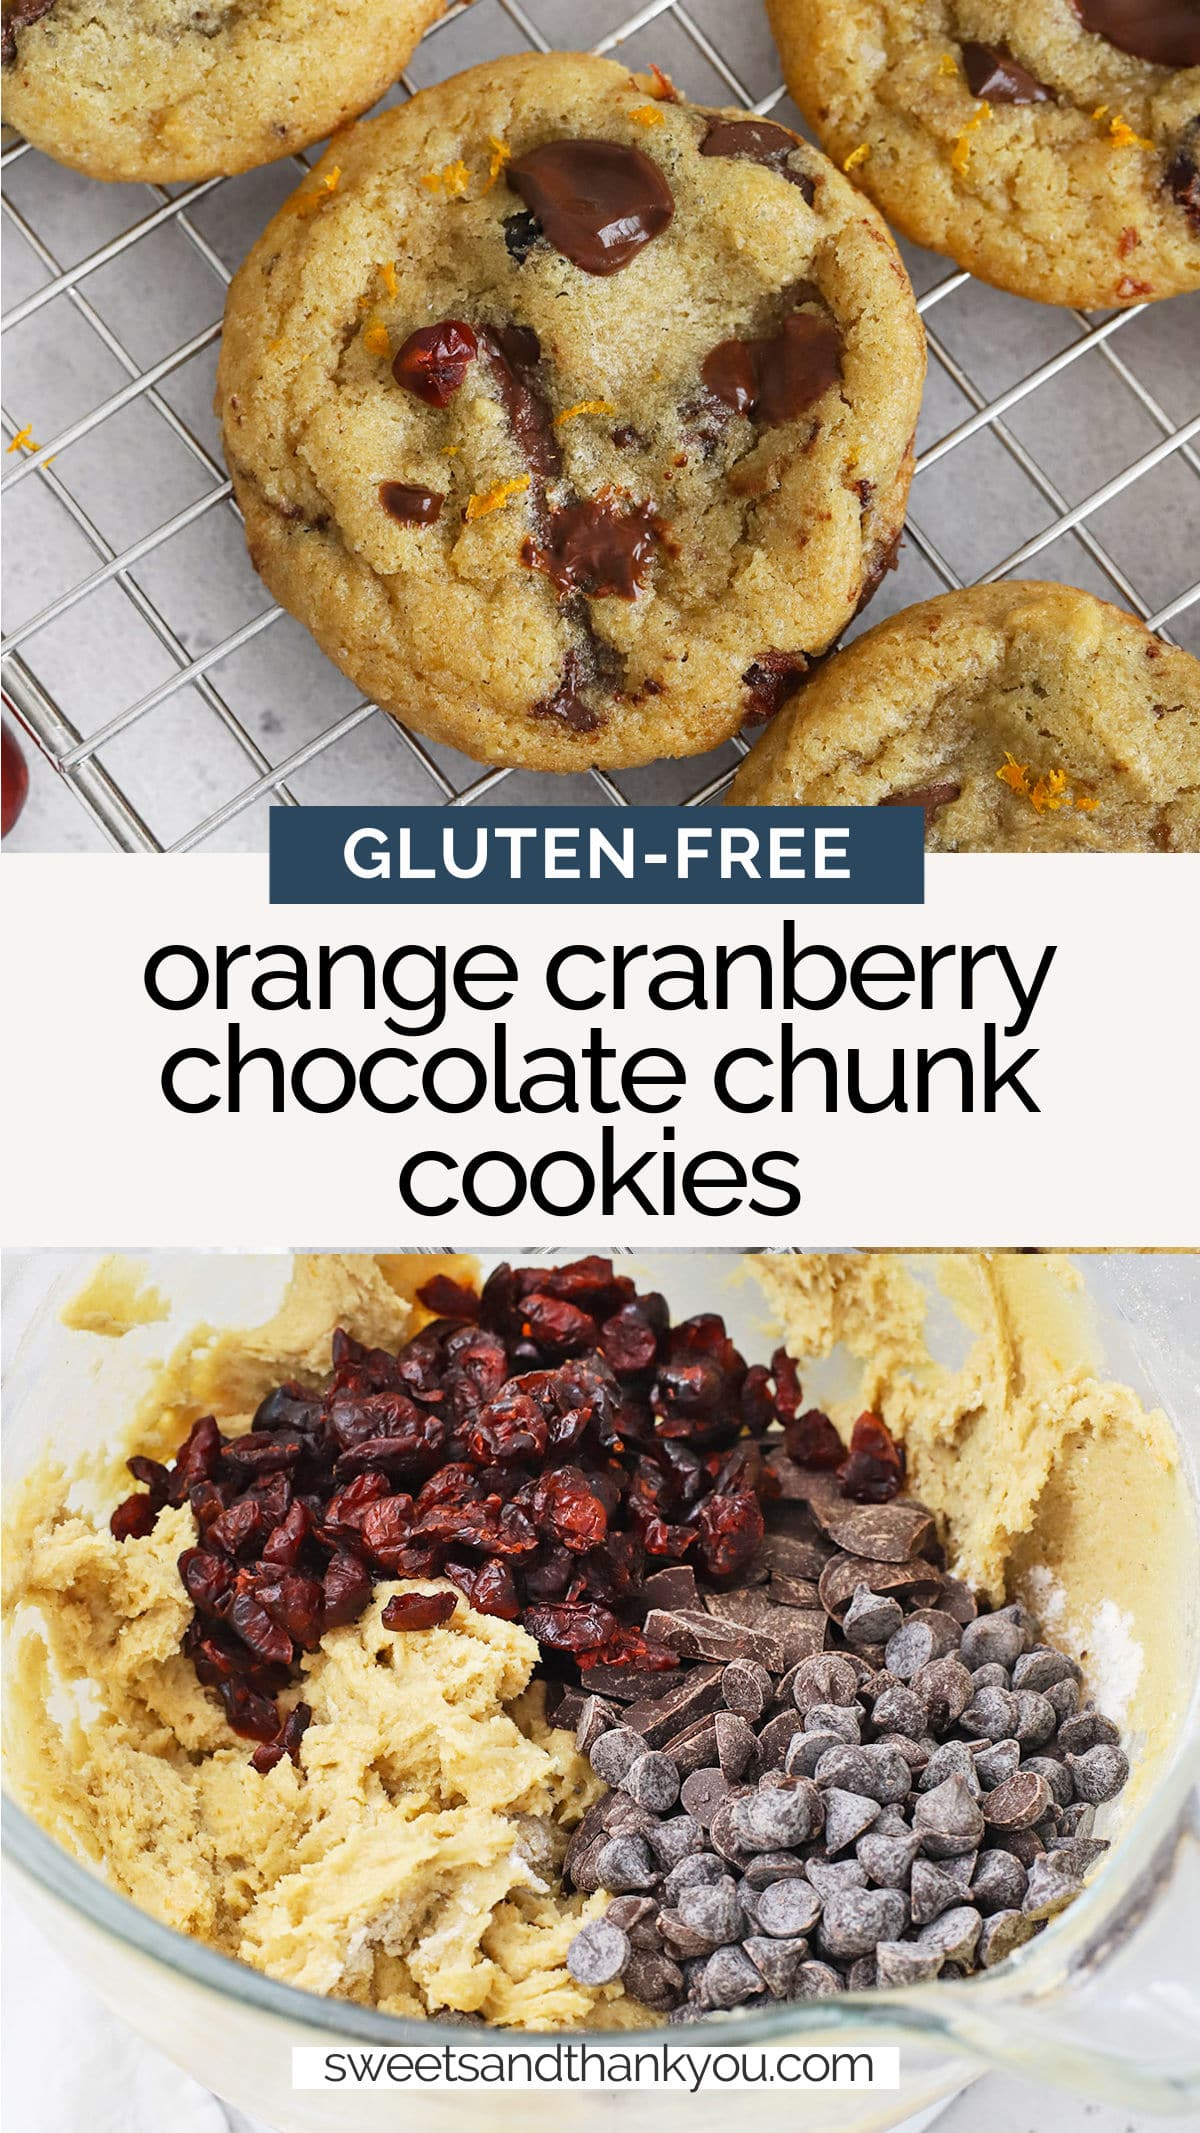 Gluten-Free Orange Cranberry Chocolate Chunk Cookies - These orange cranberry cookies have plenty of chocolate in every bite. They're a perfect gluten-free holiday cookie! // Gluten-Free Cranberry Chocolate Chip Cookies // Gluten-Free Christmas Cookies // Orange Chocolate Chip Cookies // Orange Cranberry Cookies // Gluten Free Chocolate Chunk Cookies